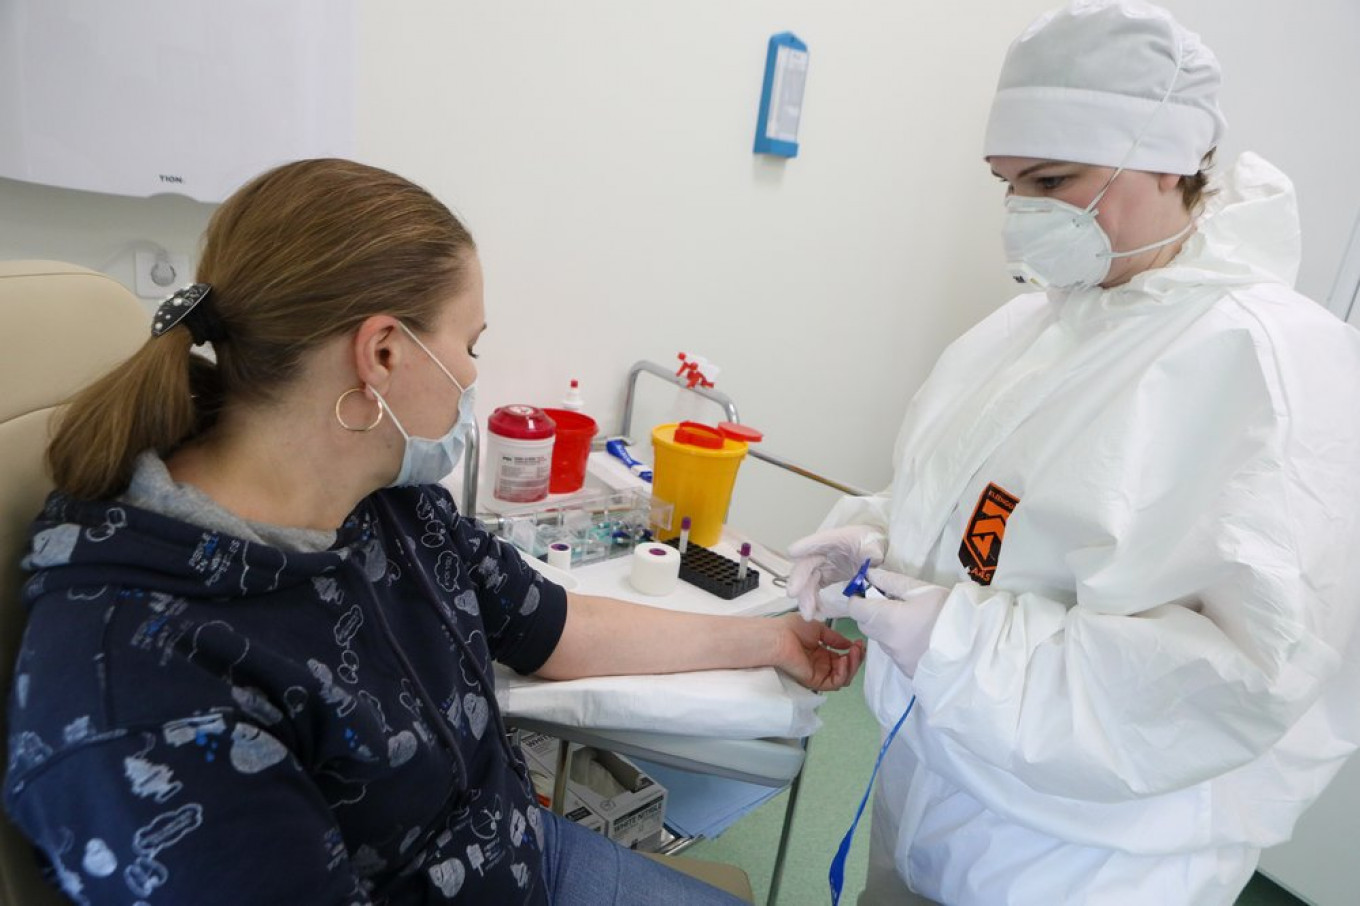 Half of Moscow’s Critical Coronavirus Patients Tested Negative, Mayor Says